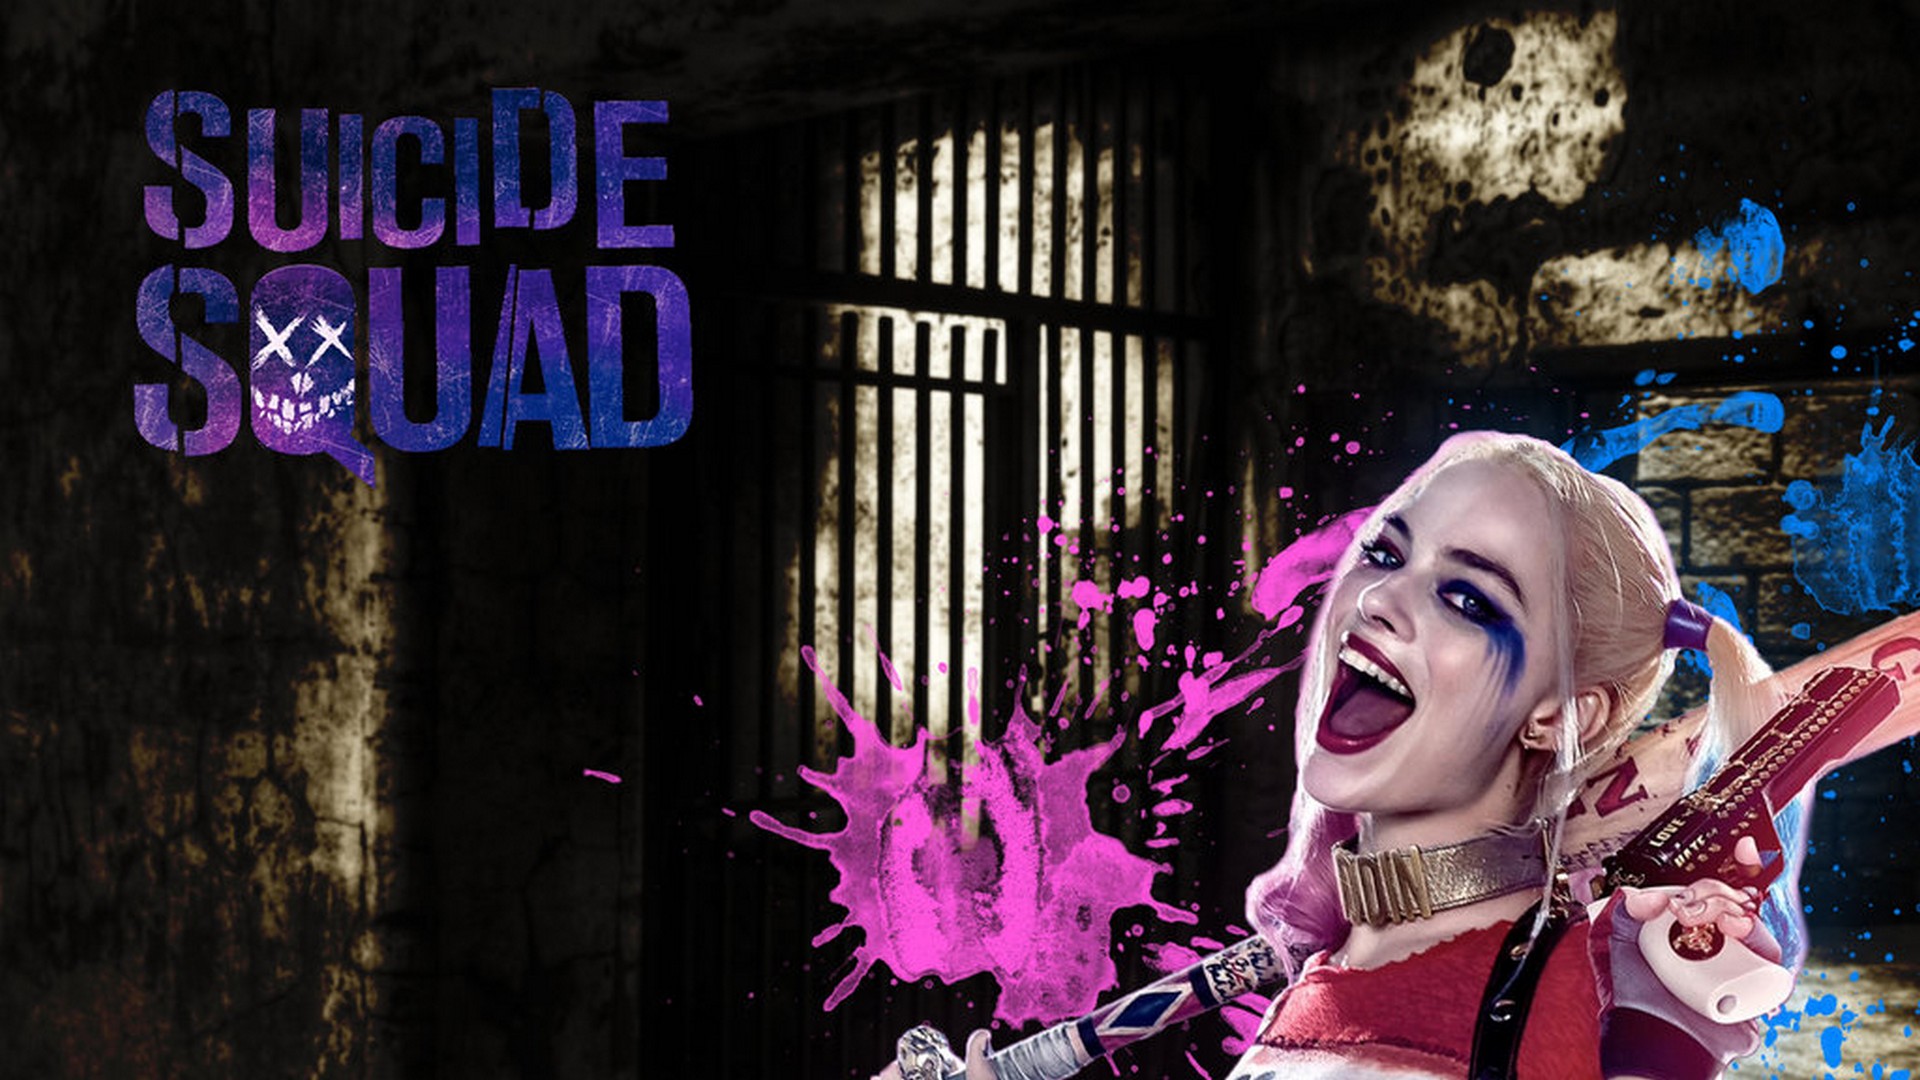 HD Wallpaper Harley Quinn Shirt With Resolution 1920X1080 pixel. You can make this wallpaper for your Desktop Computer Backgrounds, Mac Wallpapers, Android Lock screen or iPhone Screensavers